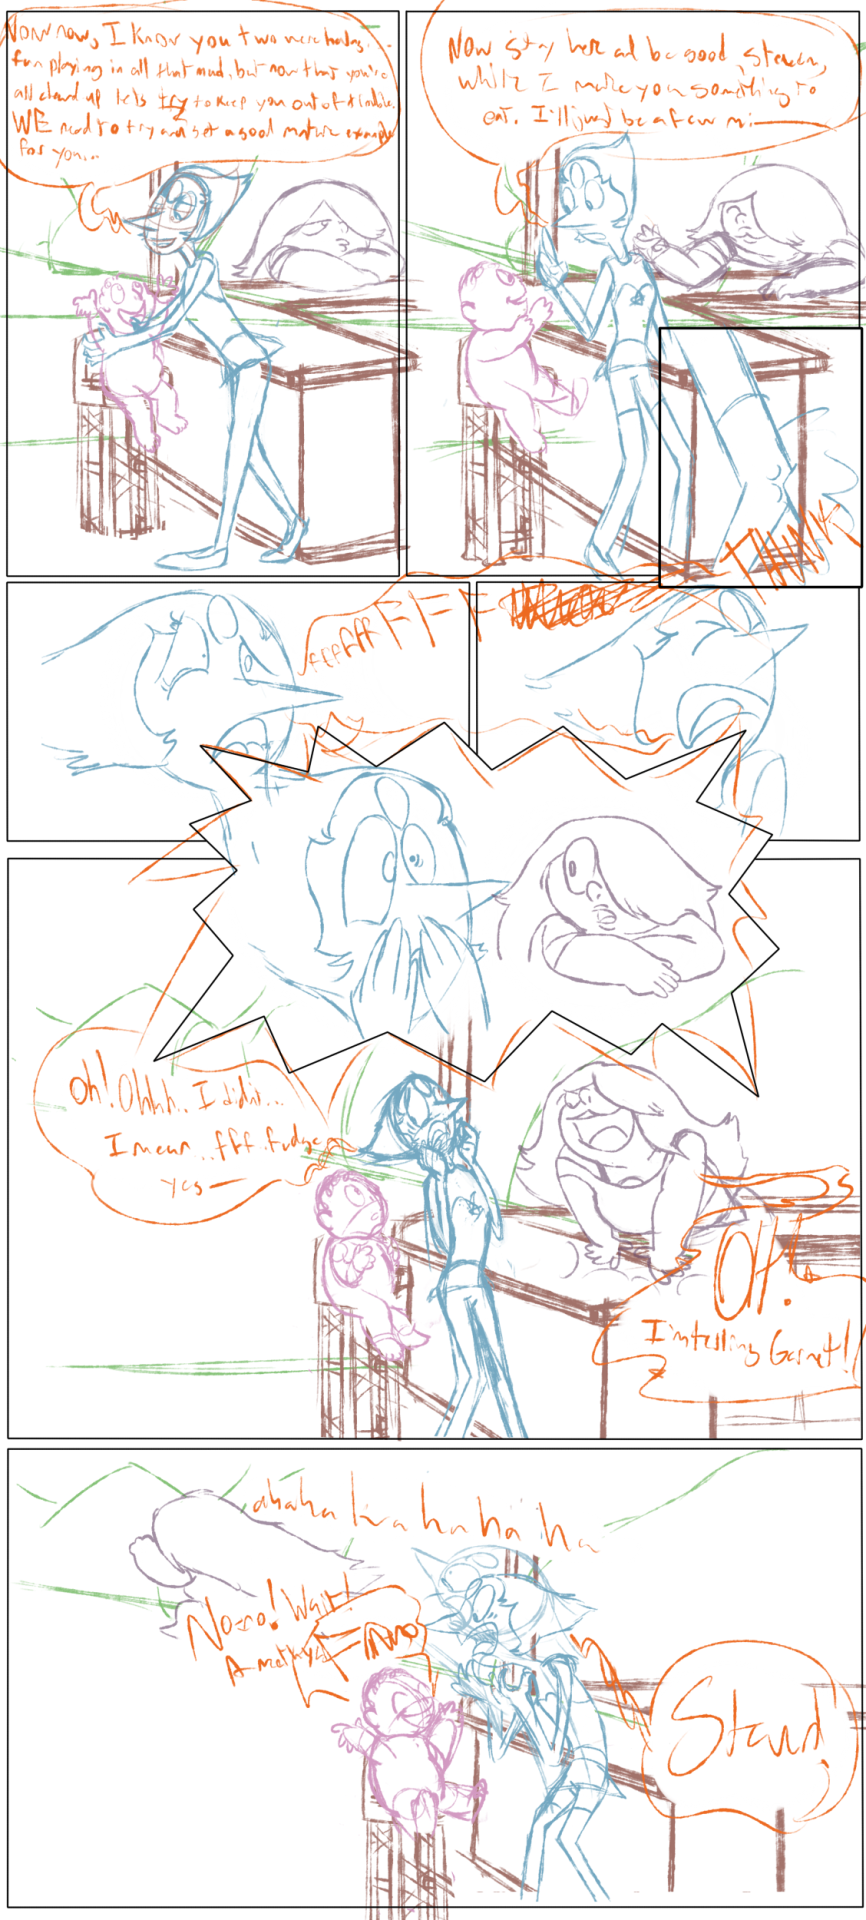 (fullview)Okey doke, here&rsquo;s the rough sketch of the SU one-page comic I